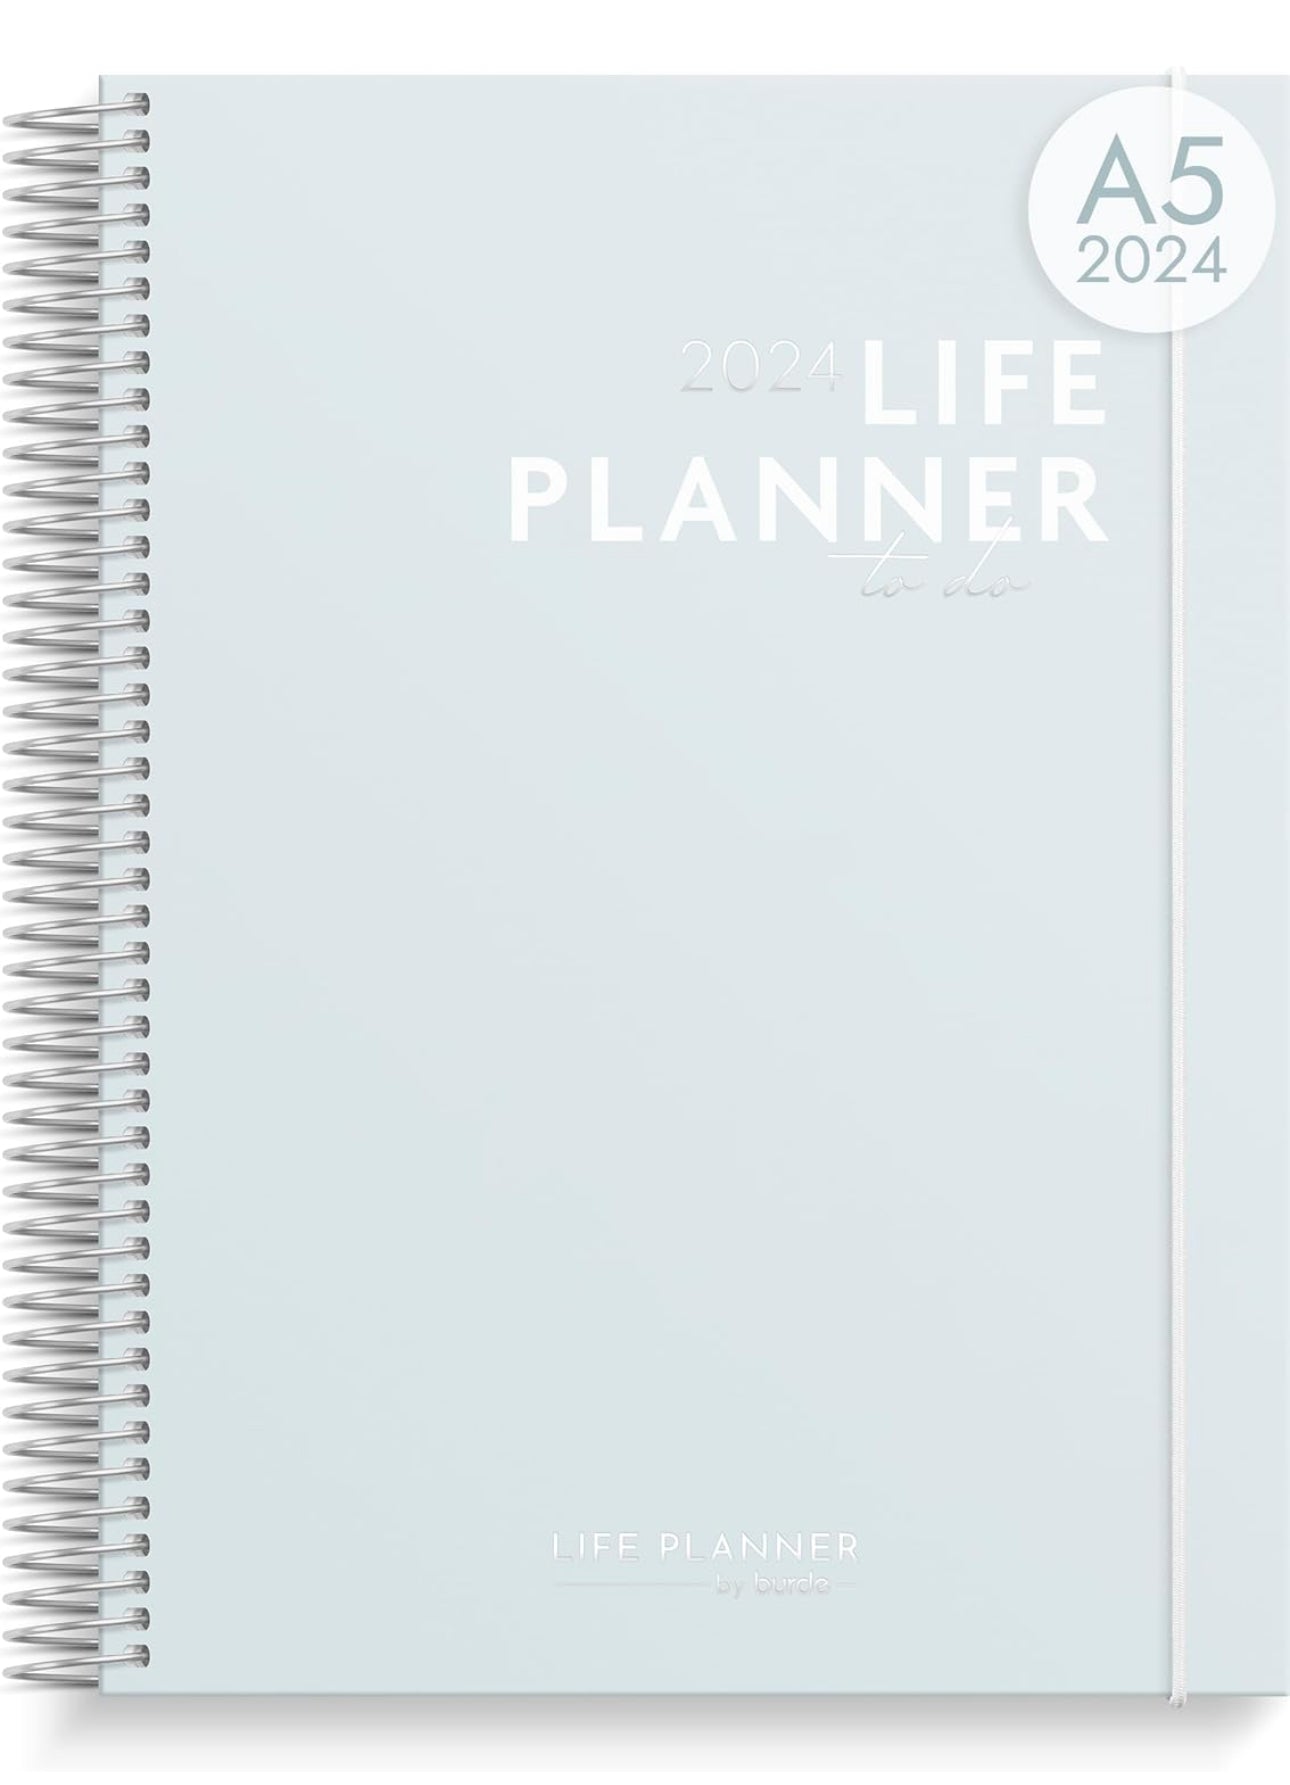 Burde Planner 2024, Daily & Weekly Planner, Life Planner To Do